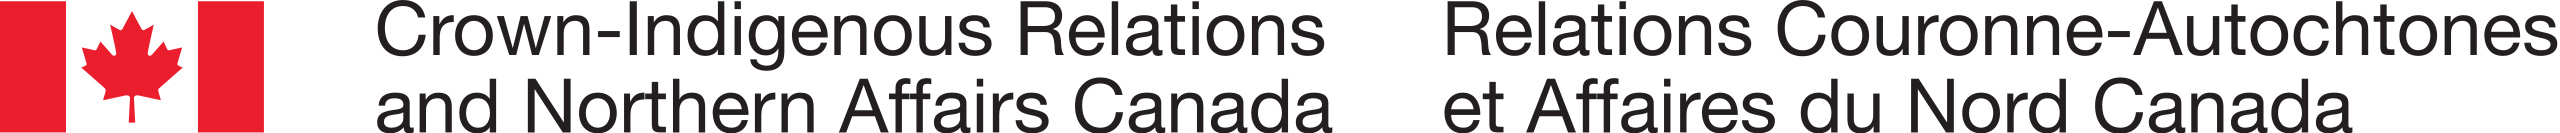 2560px-Crown-Indigenous_Relations_and_Northern_Affairs.svg.png